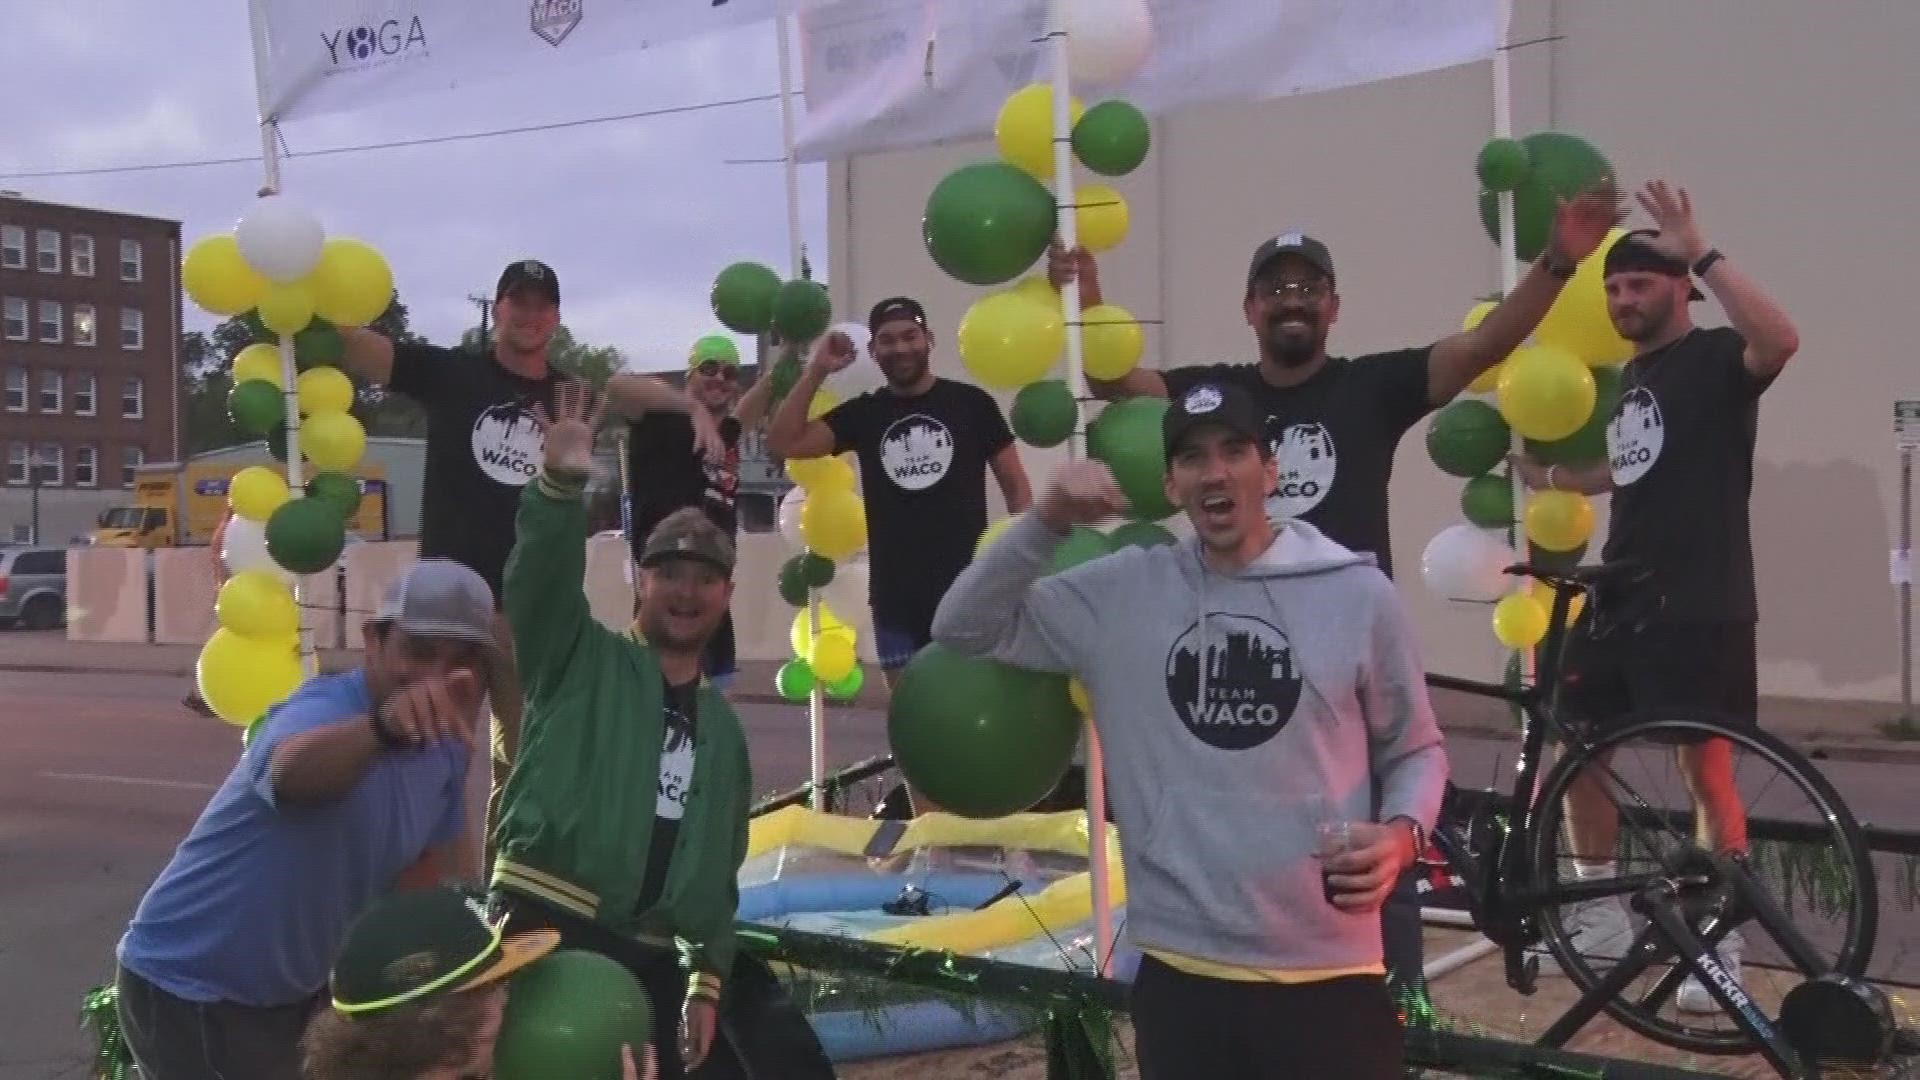 On Saturday, floats and Bear fans all made their way to Waco for the annual Baylor homecoming parade.